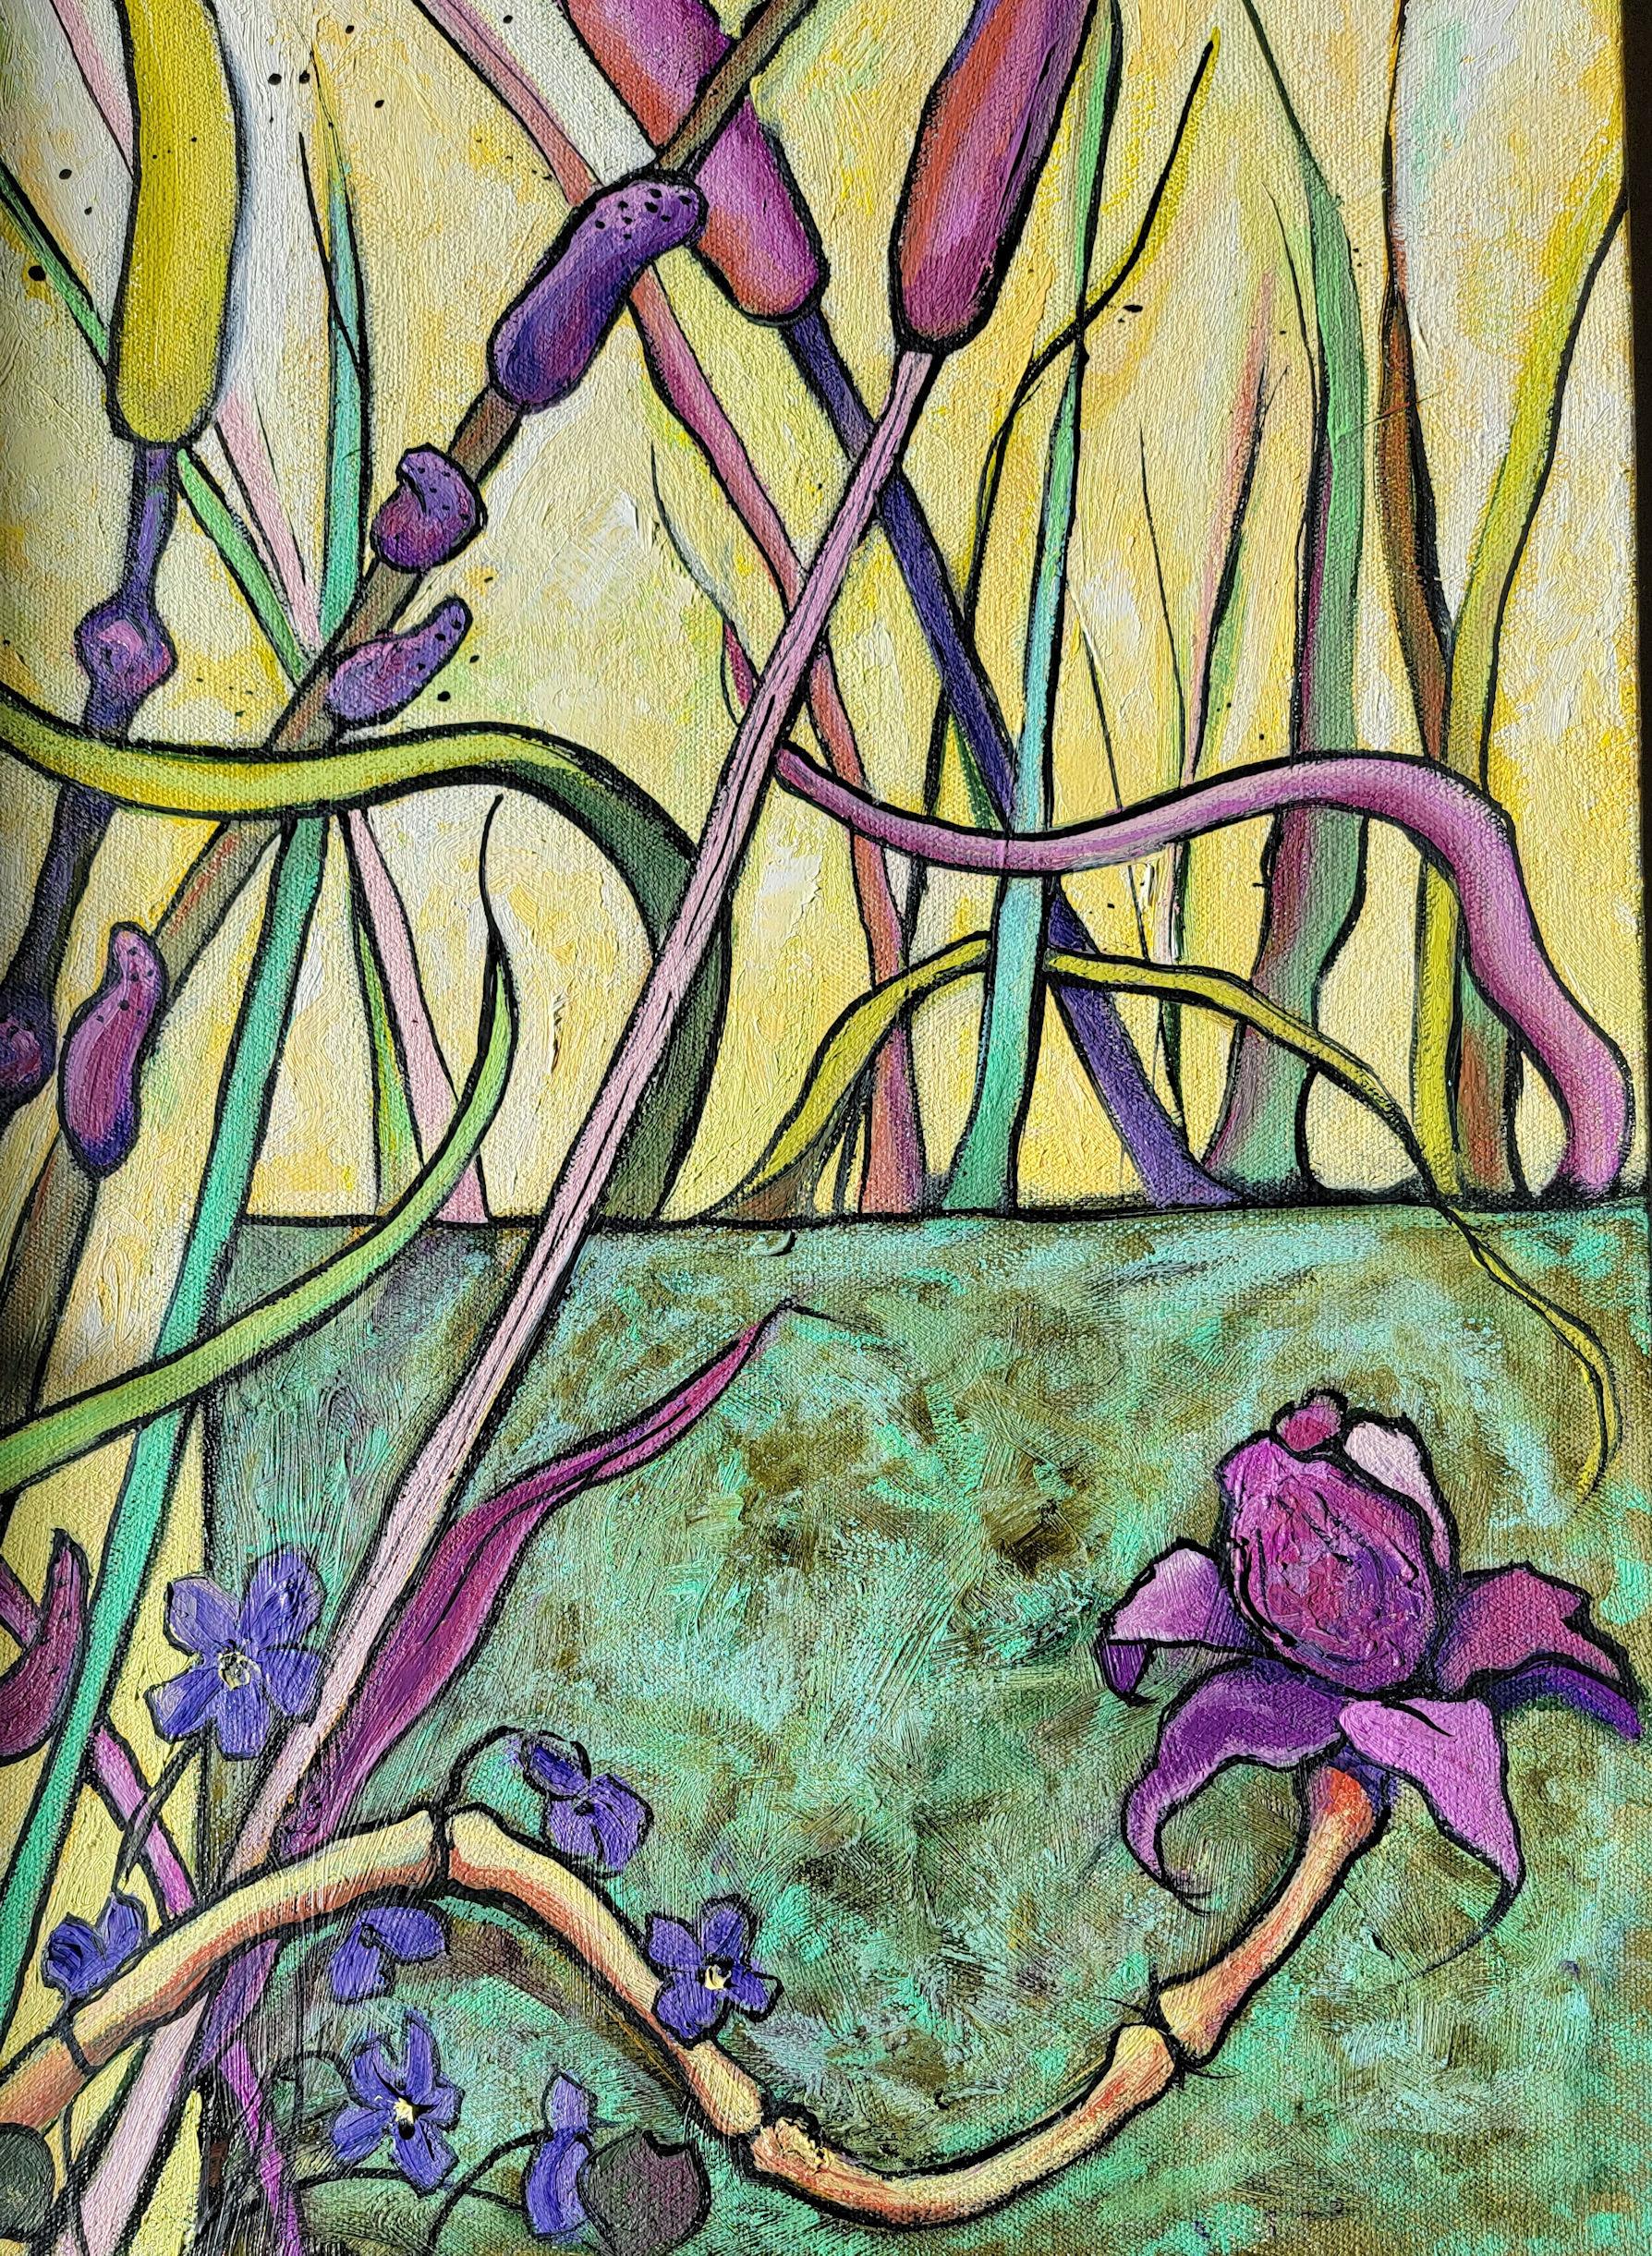 From the easel of New England painter, Anita Loomis, “Violace” is a 20 x 30 x 1.5 inch oil painting on canvas that celebrates the growth and evolution of flowers in rich and vivid tangles of green and violet. Imagination and a love of plants